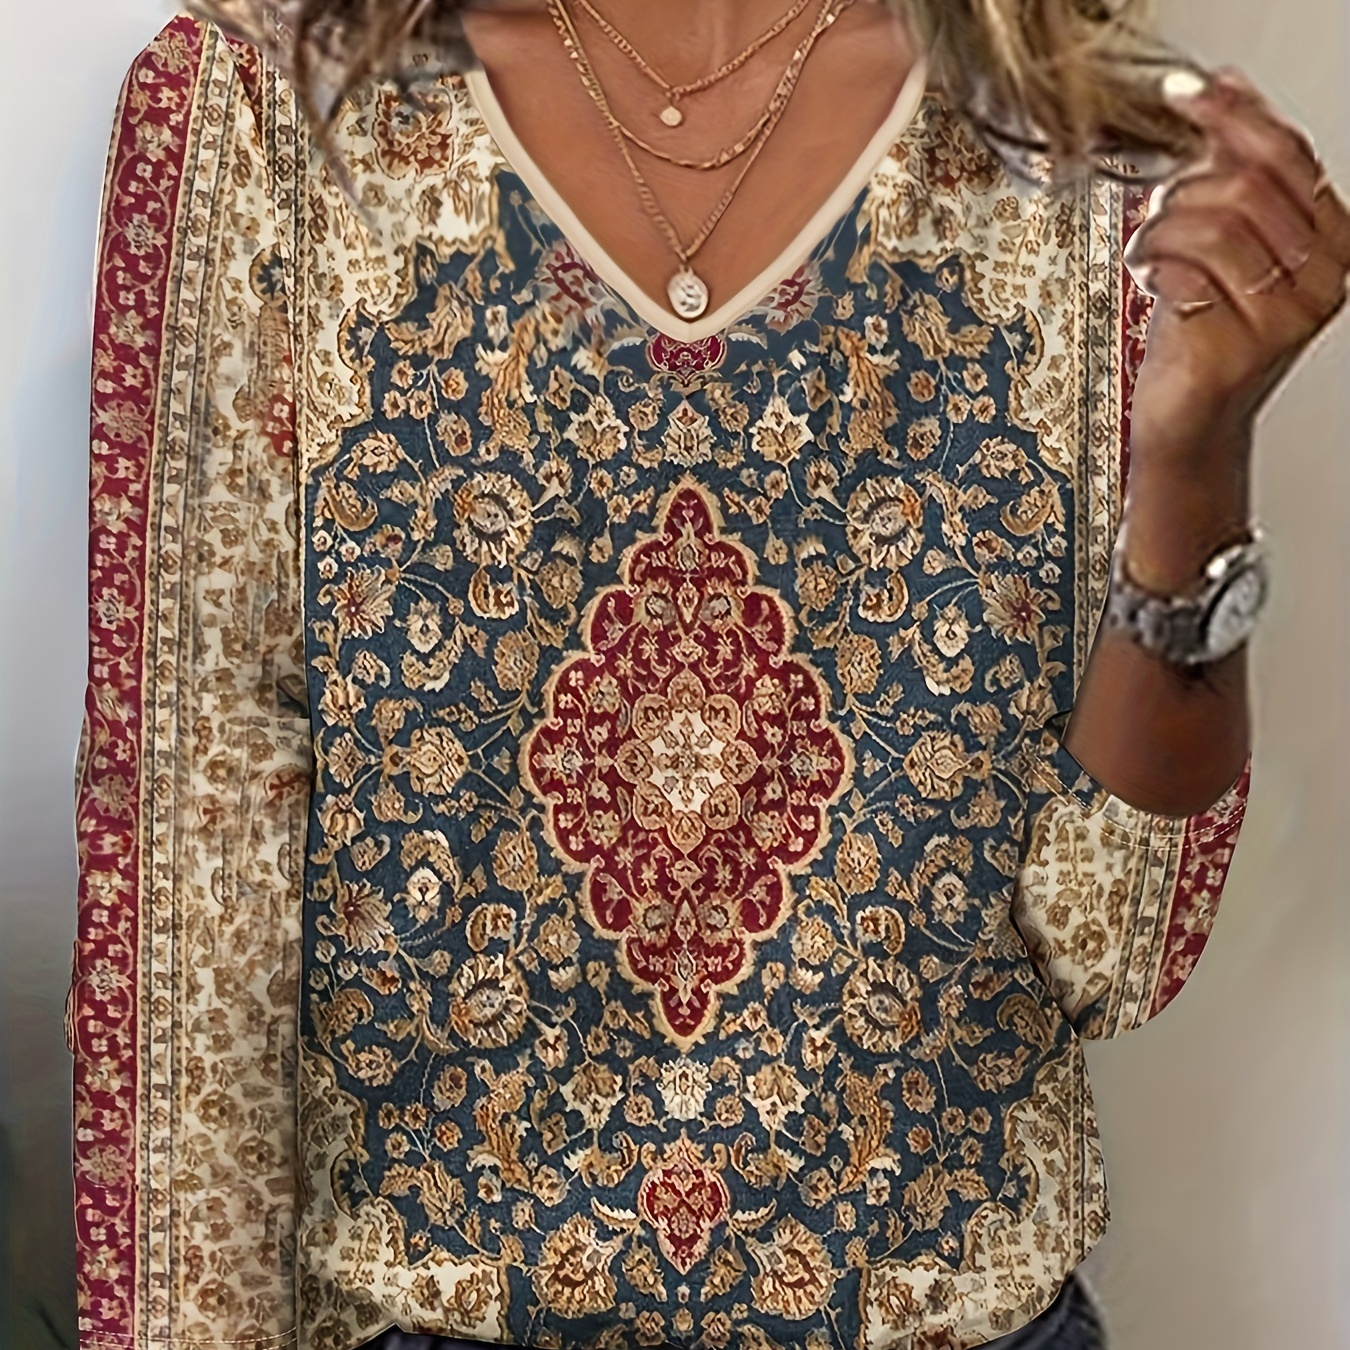 Ethnic Floral Print V Neck T-shirt, Vintage Long Sleeve Top For Spring & Fall, Women's Clothing